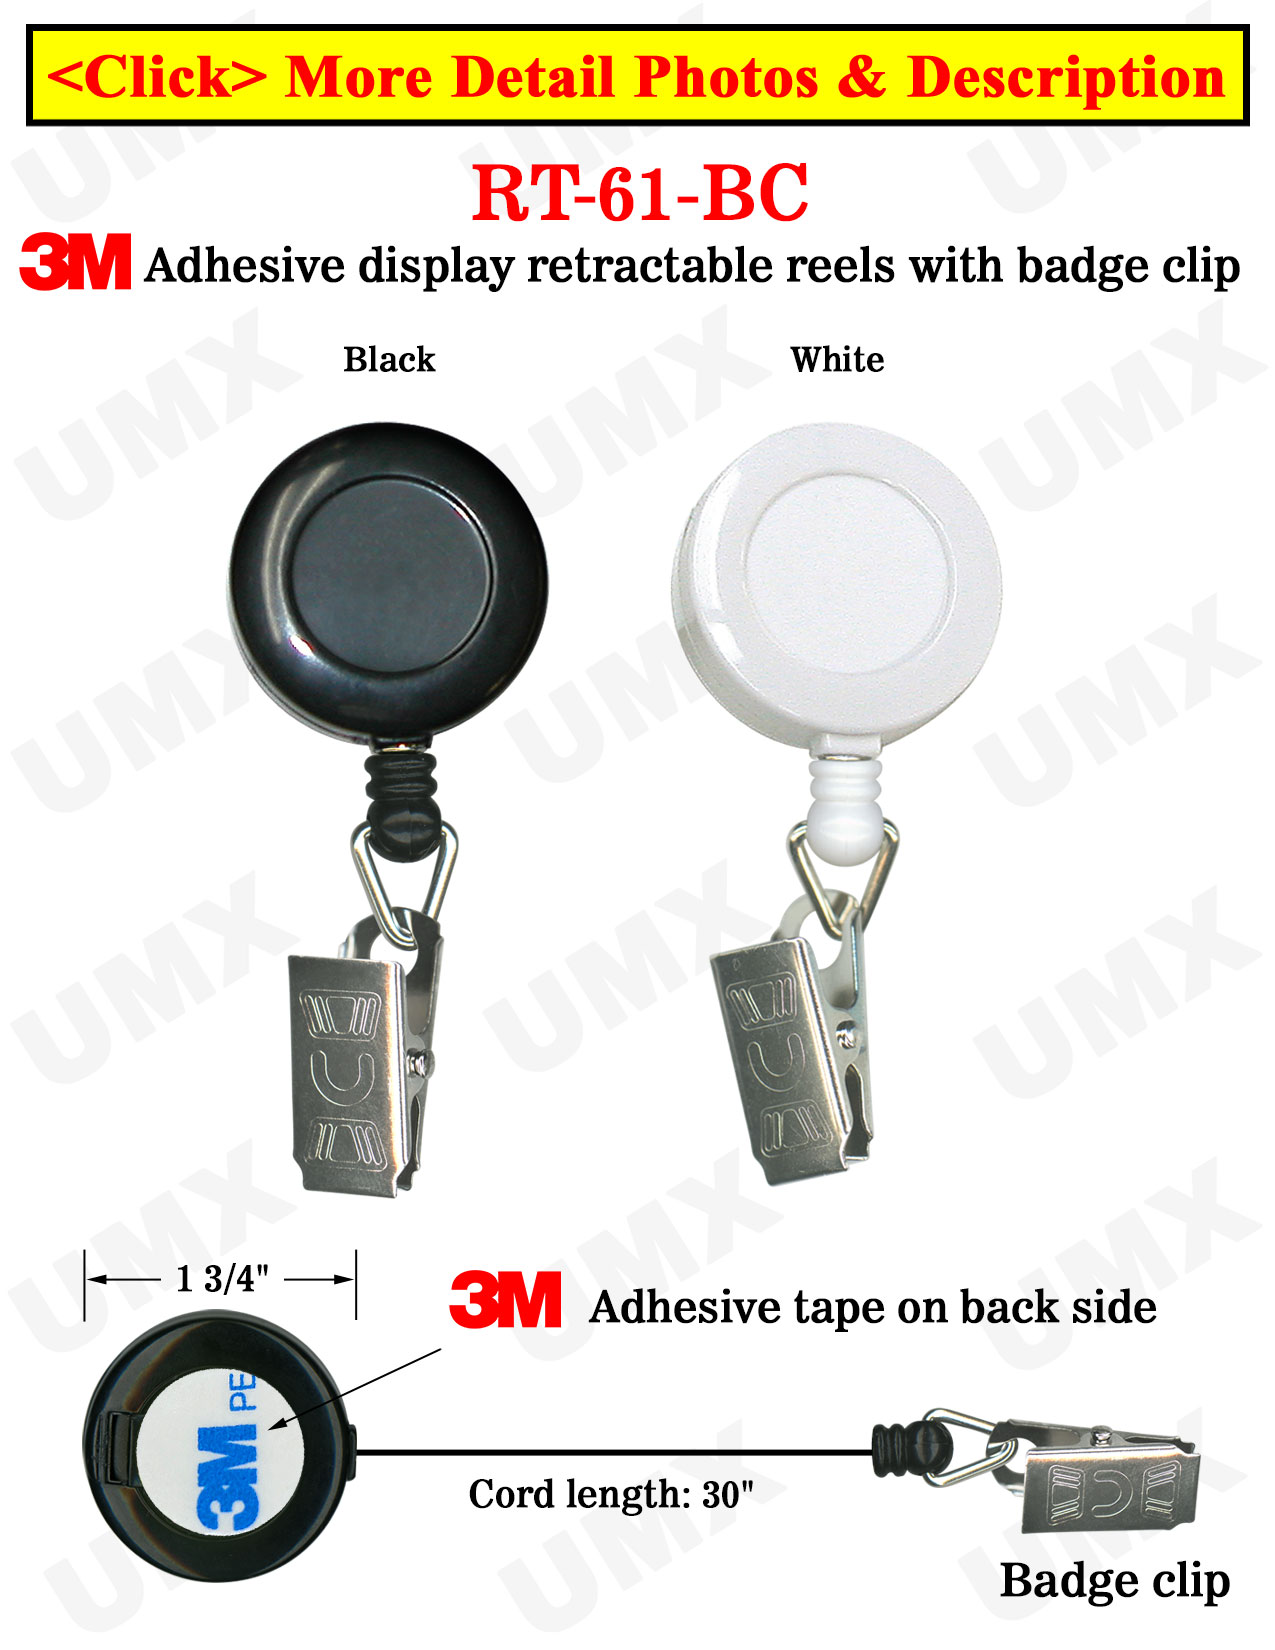 High Quality Low Cost Cheap Price Display Retractable Reels With Metal Clips and Adhesive Backing